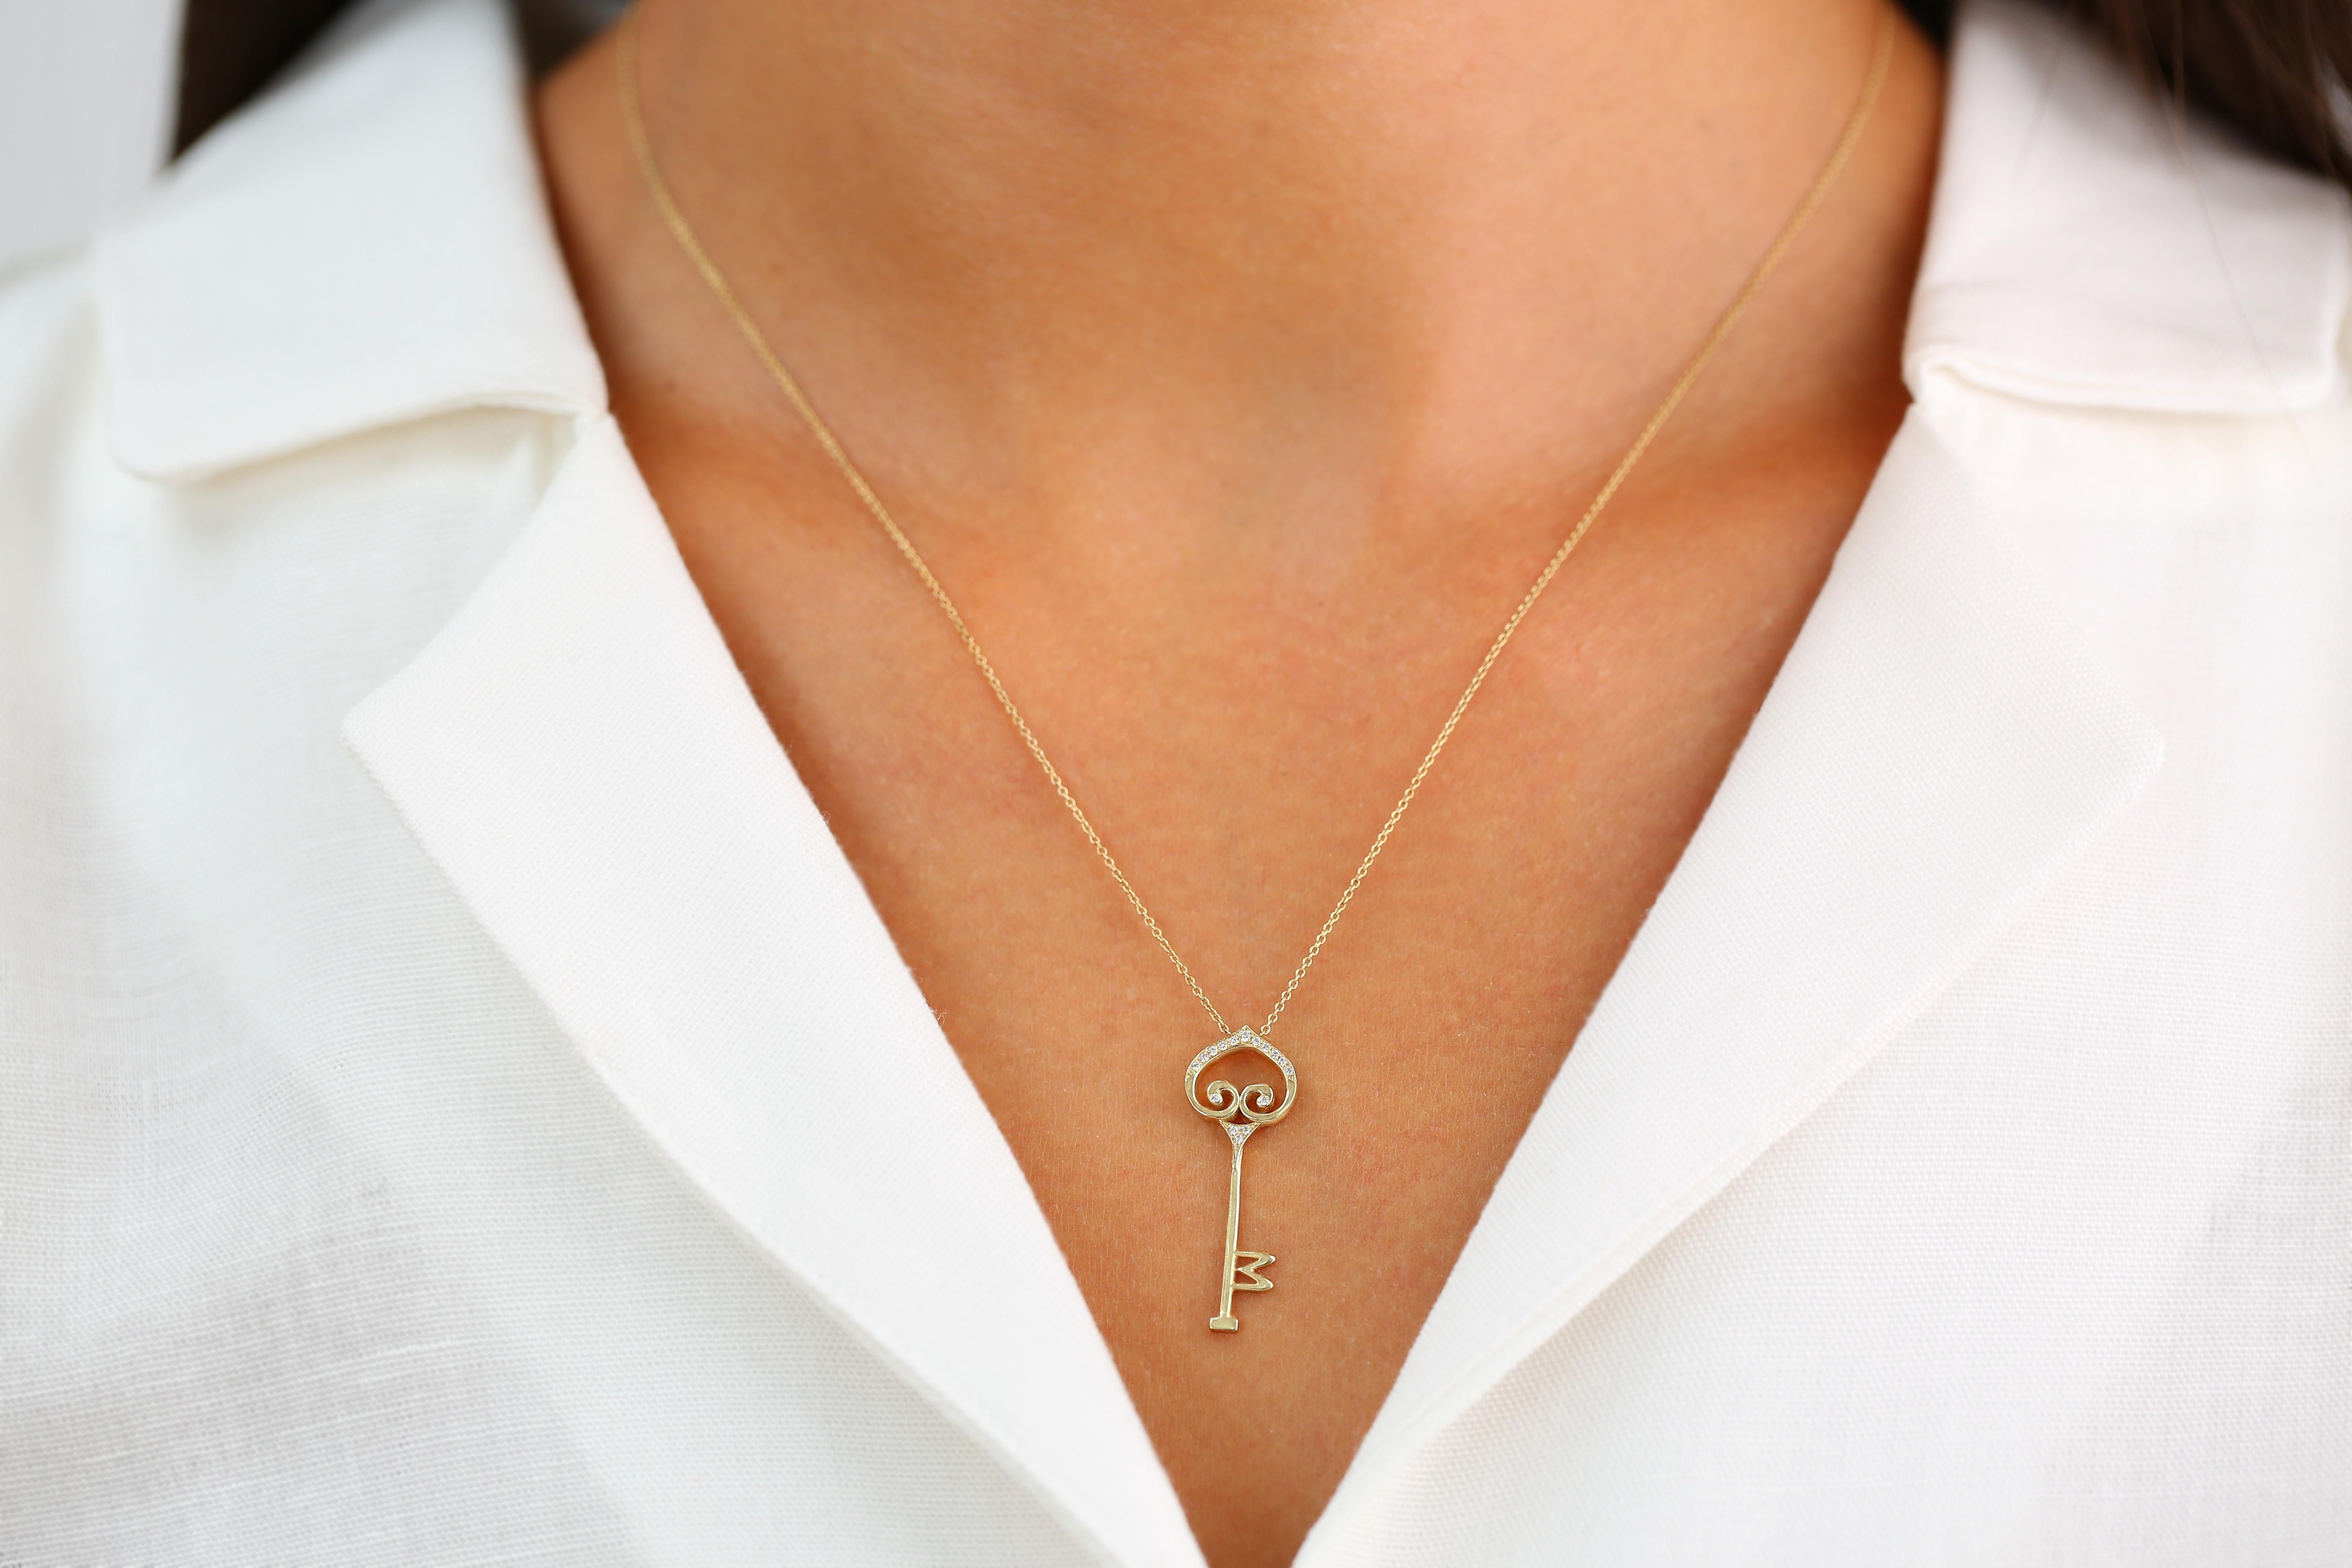 14K Gold Key Necklace with Diamonds, Diamond Key Necklace, Gold Key Necklace, 14K Key Necklace, Key Charm Necklace, Gift For Her

Special desing necklace with diamonds. It’s a manual labour product. ‘Handmade’. Fashionable product. 

This necklace